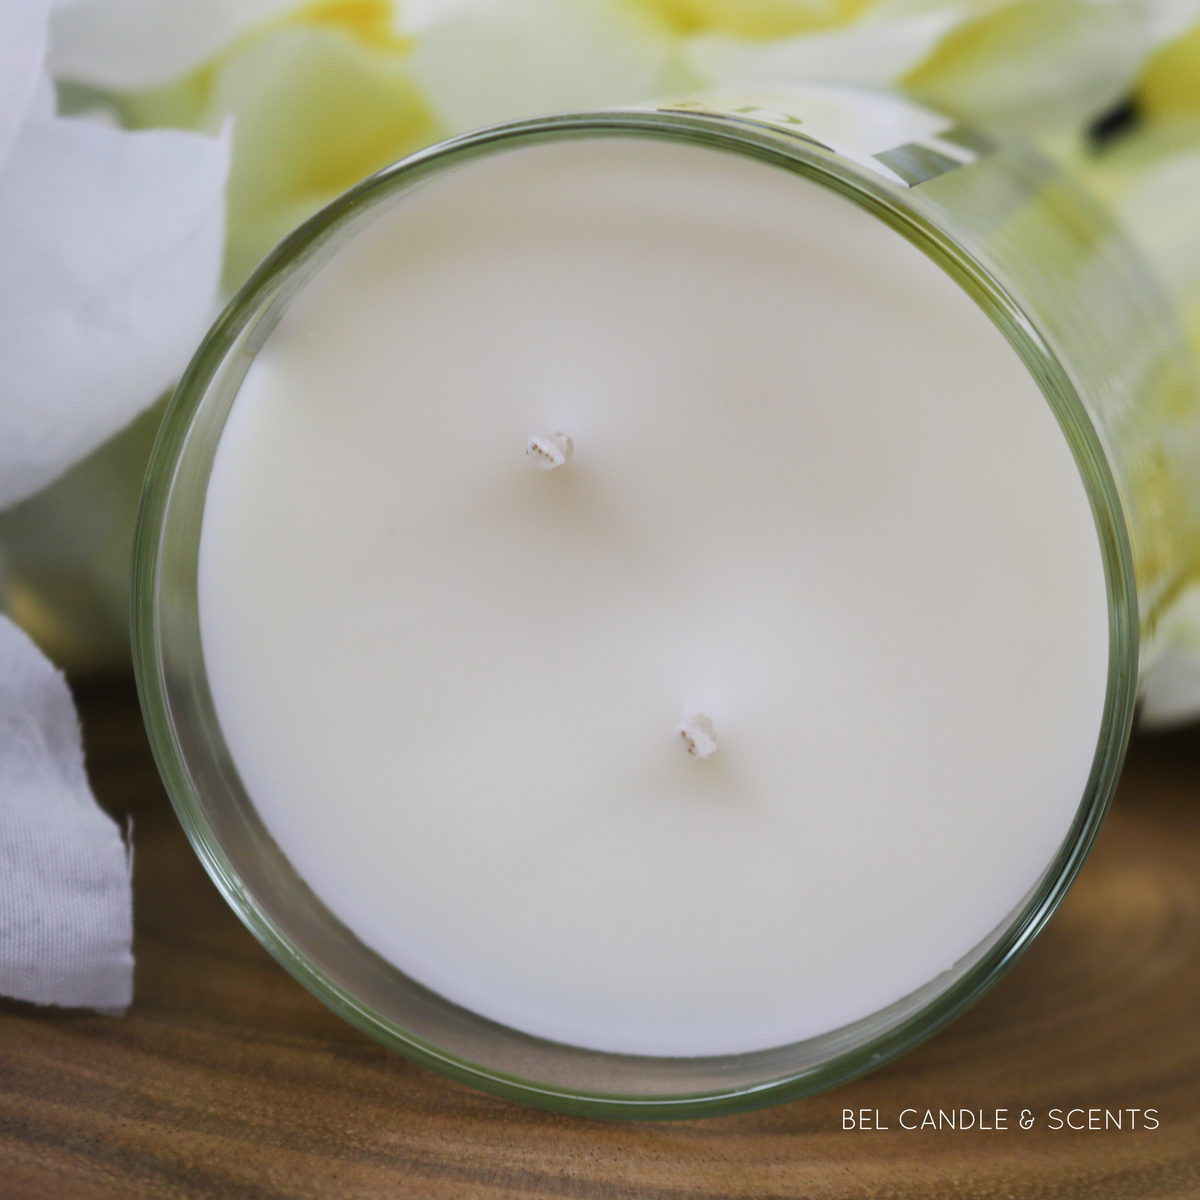 SOY/COCONUT SCENTED CANDLE  MORNING BLISS I BEL CANDLE & SCENTS – Bel  Candle & Scents